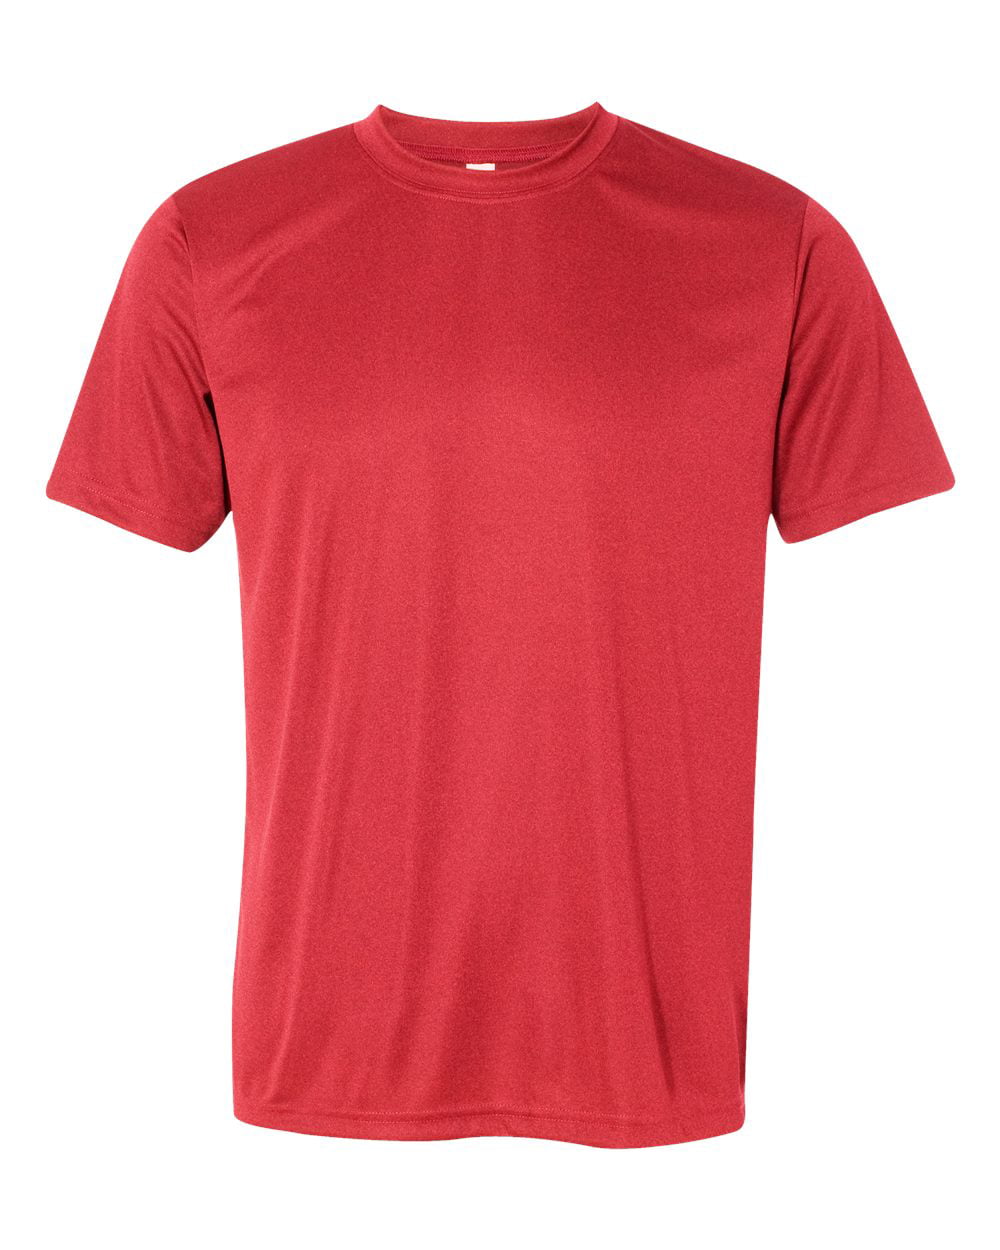 All Sport - All Sport Mens Polyester Sport T-Shirt, XS, Heather Red ...